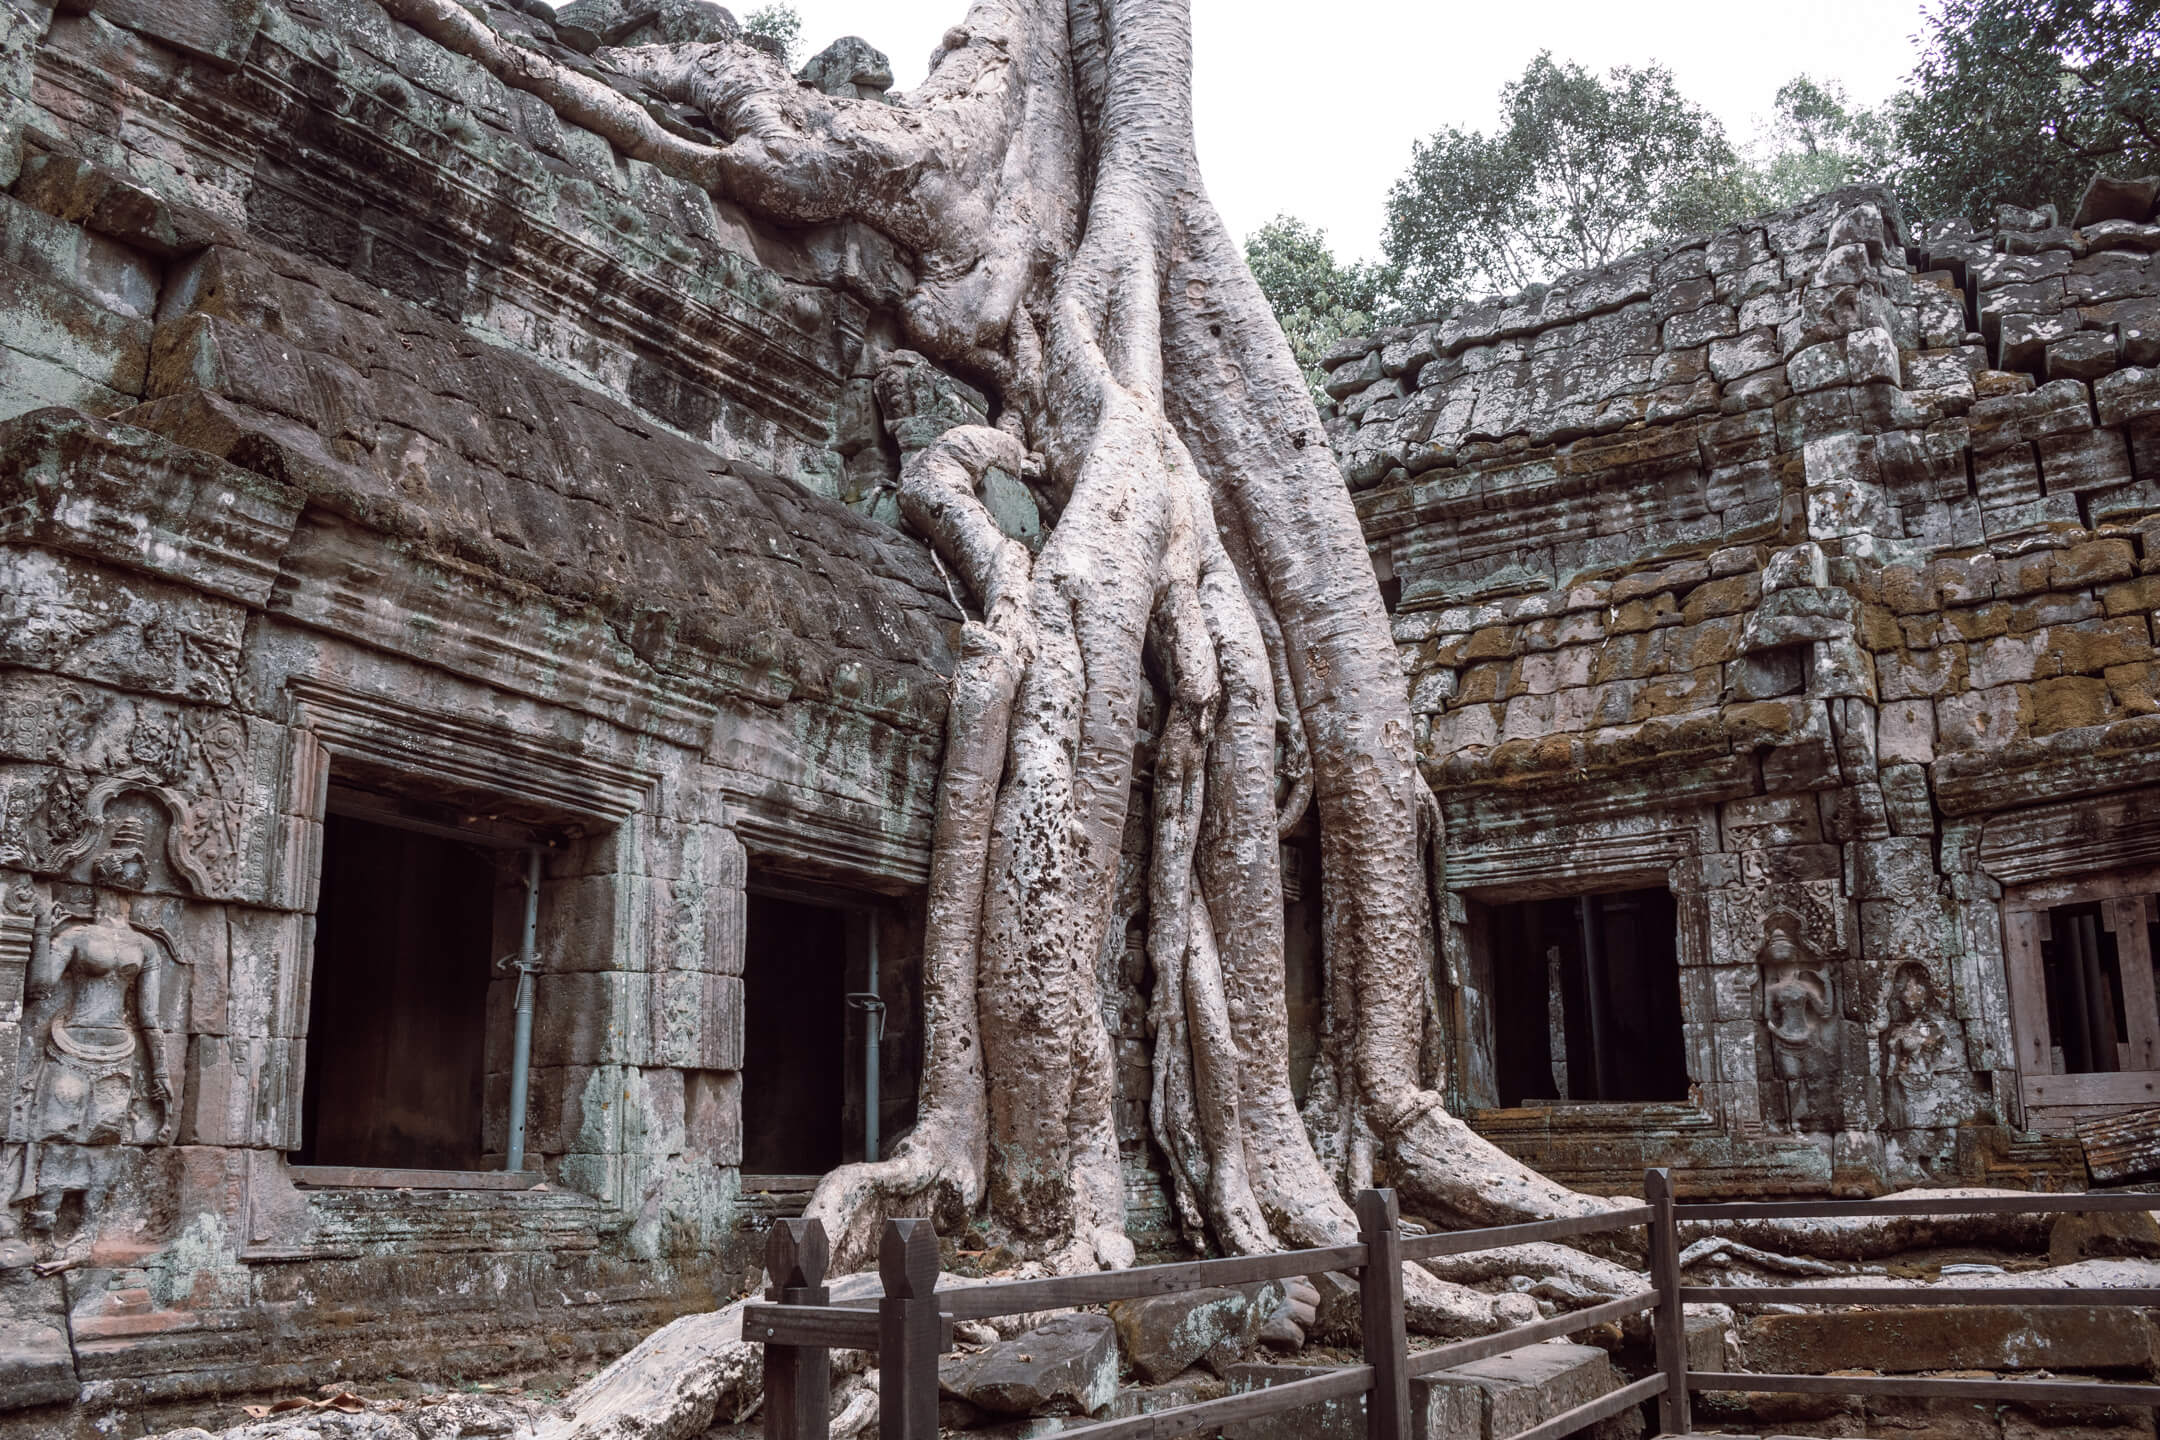 Tree wrapping around temple in Ta Phrom, Angkor Wat.